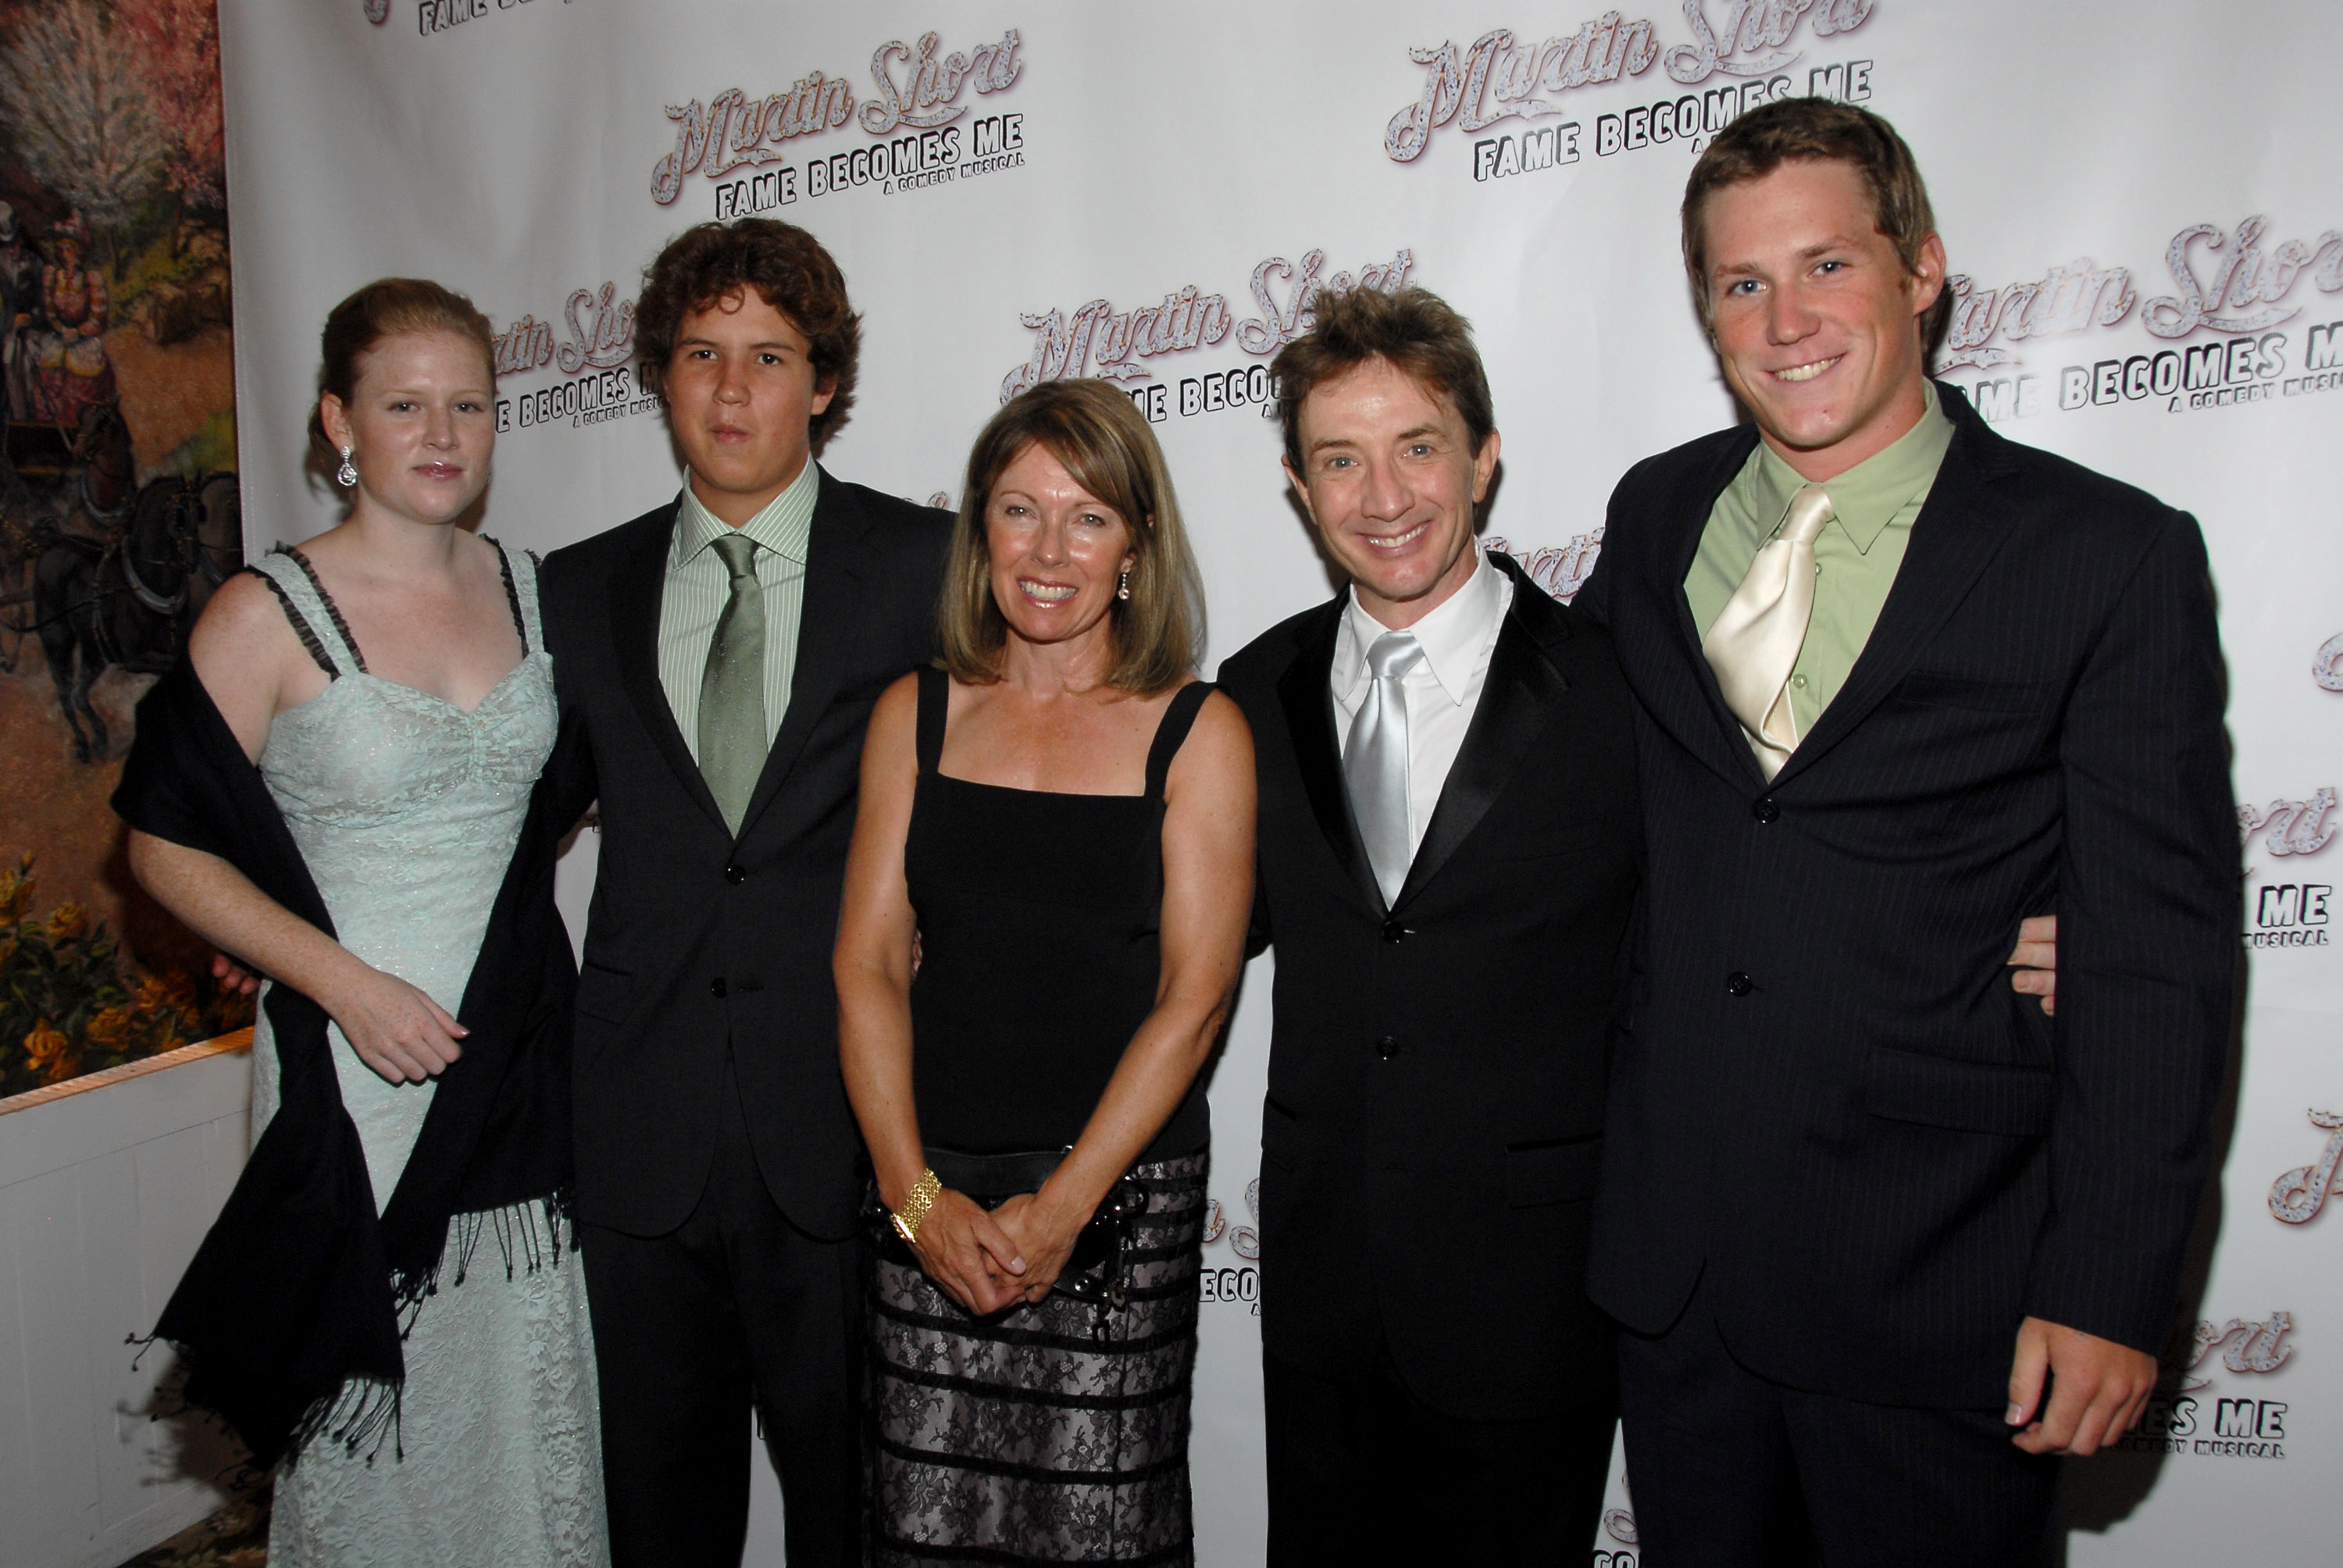 Katherine Short, Henry Short, Nancy Dolman, Martin Short, and Oliver Short at the Broadway Opening Night of "Fame Becomes Me" on August 17, 2006. | Source: Getty Images